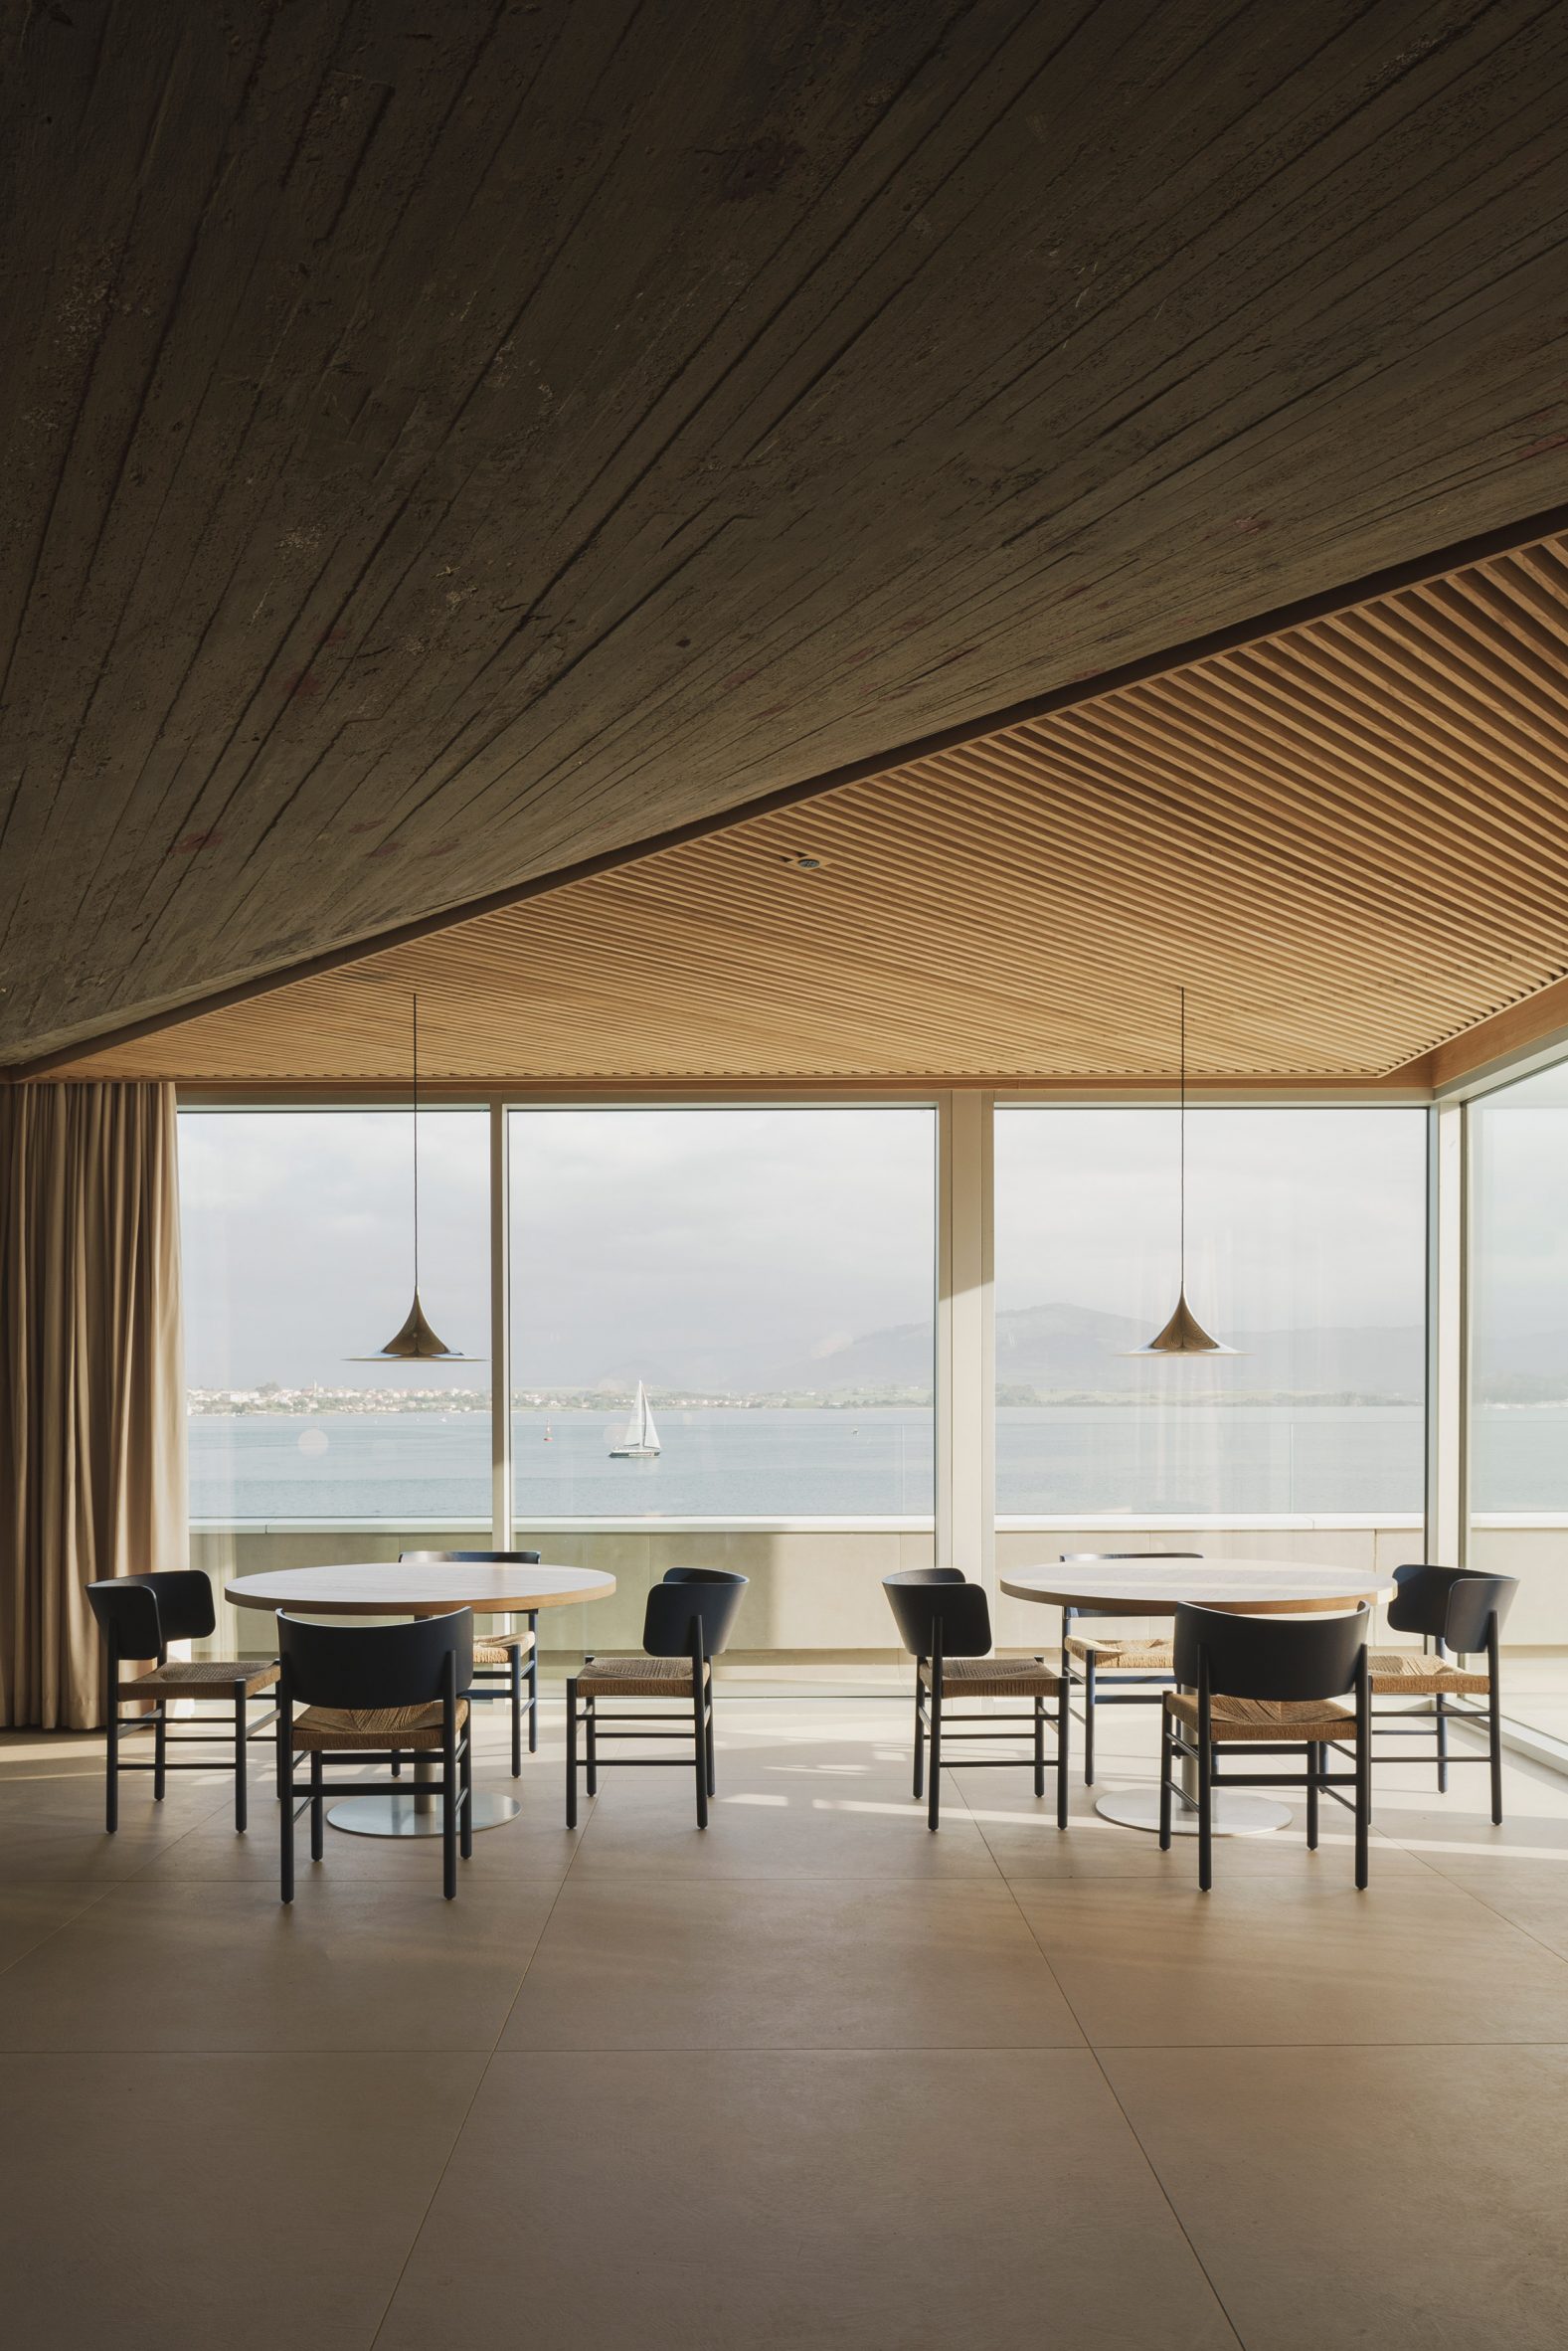 Dining tables overlooking views of the Santander bay